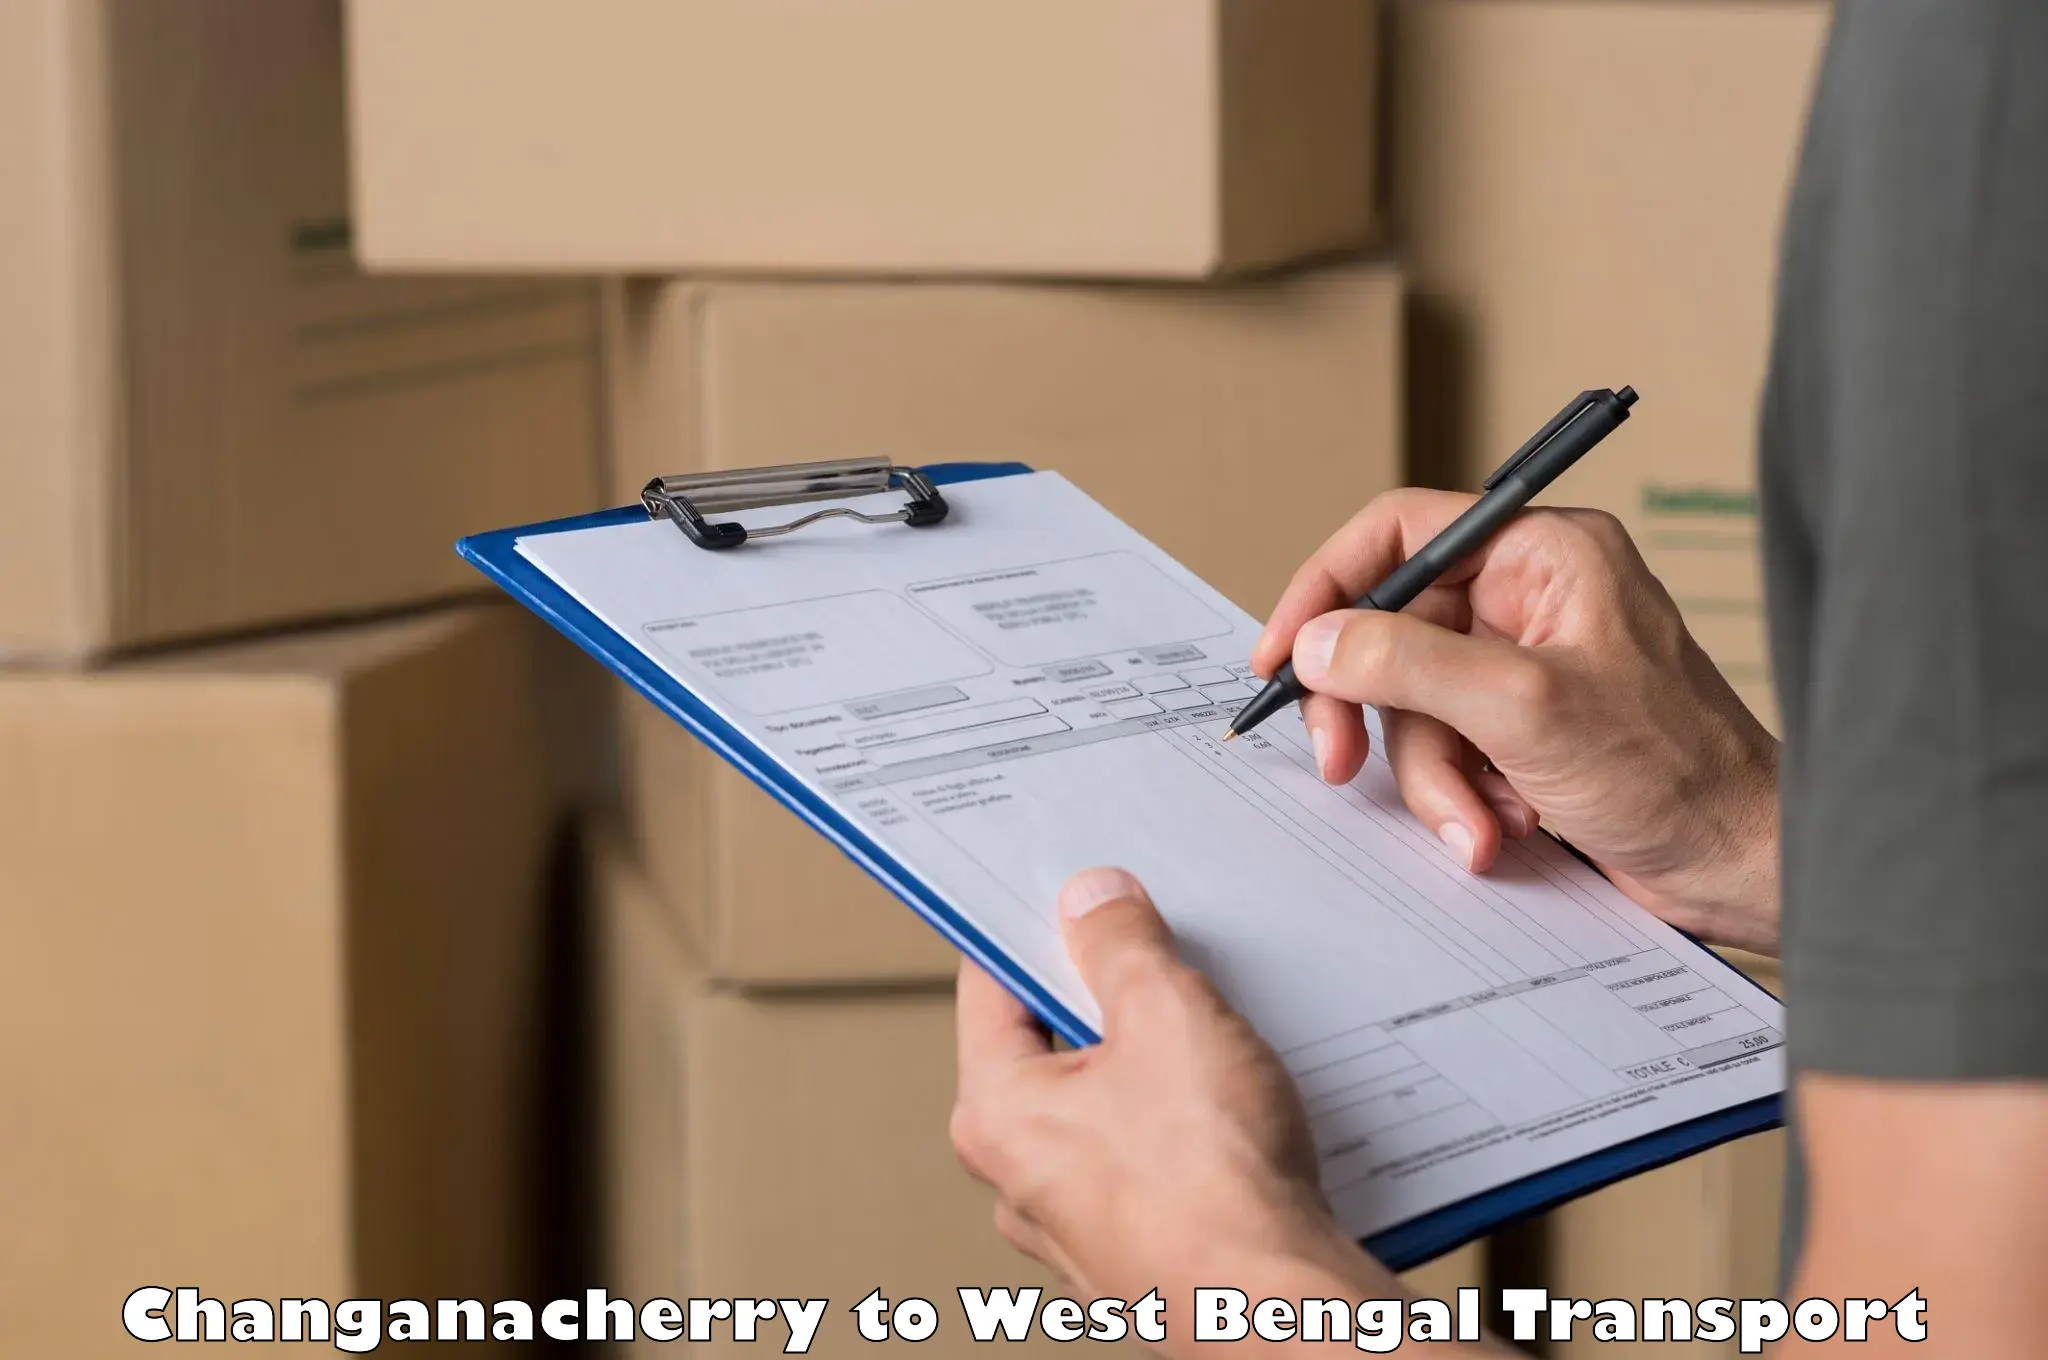 Container transport service Changanacherry to West Bengal